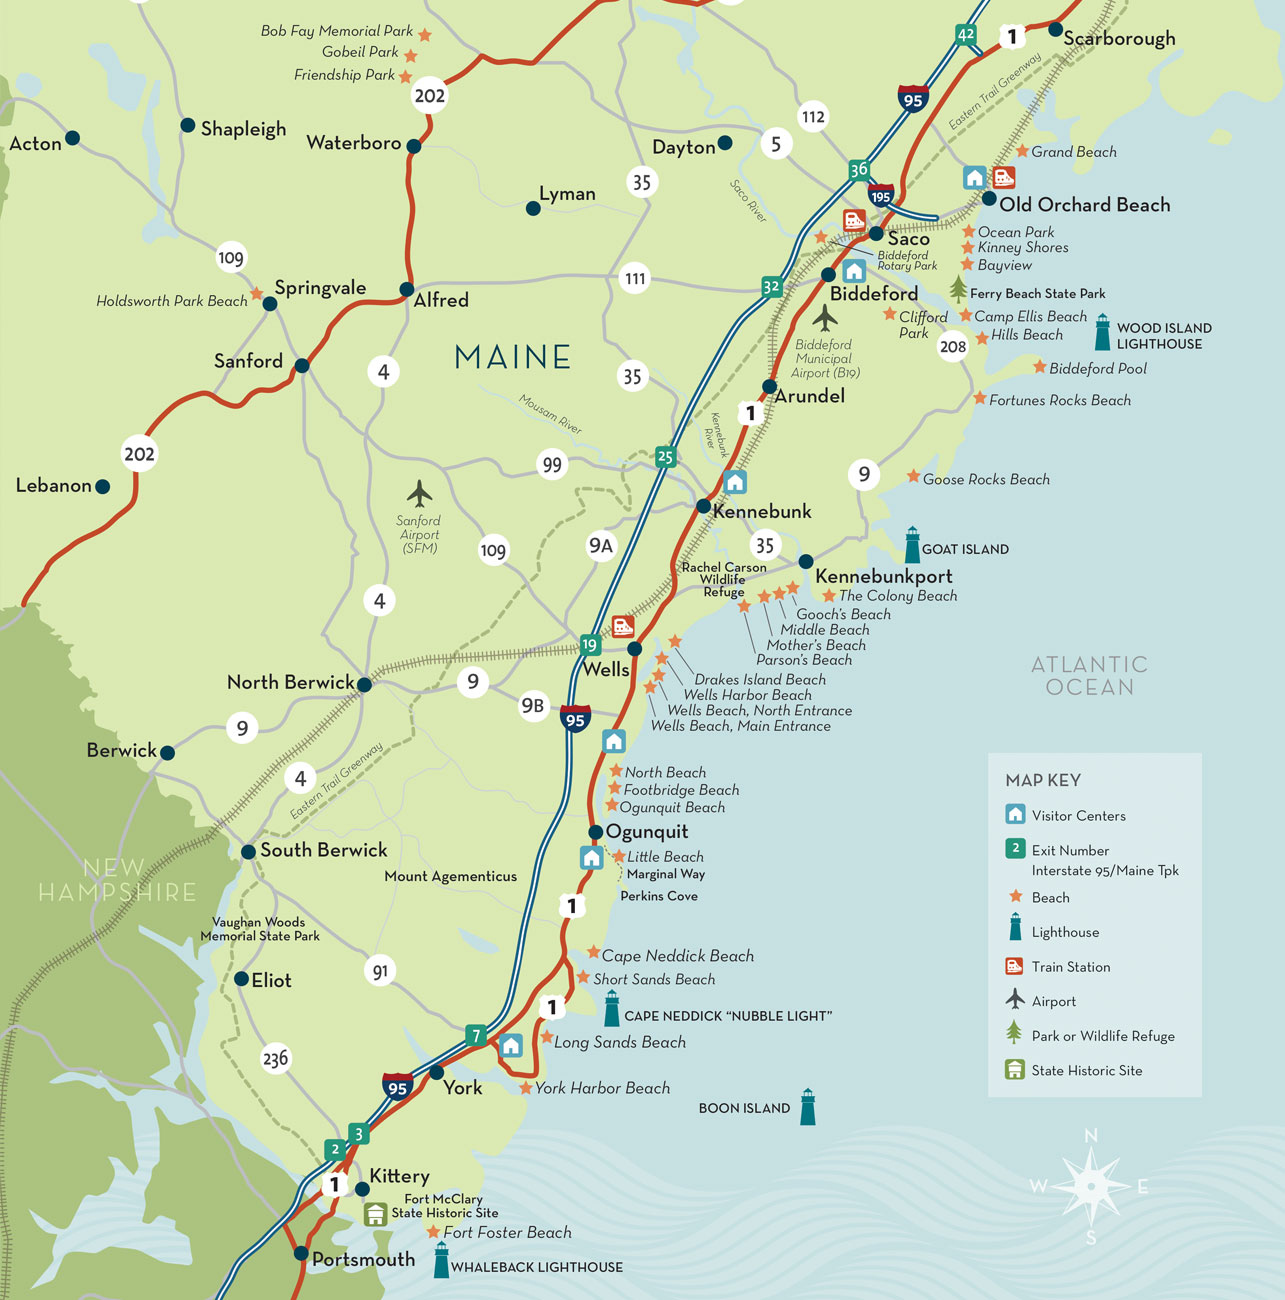 Download A Copy Of The Maine Beaches Map Visit The Maine Beaches